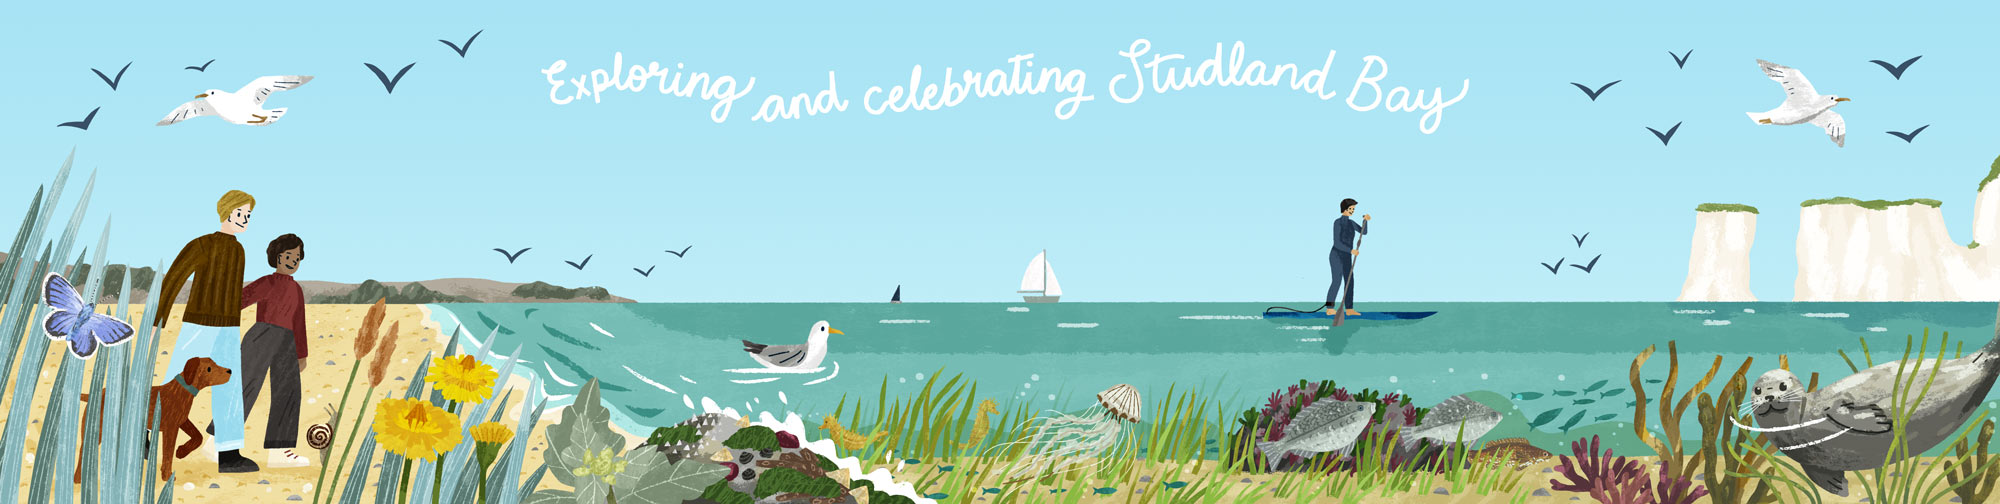 A bespoke illustration of Studland Bay created for a live illustration event by the Marine Management Organisation by Elly Jahnz